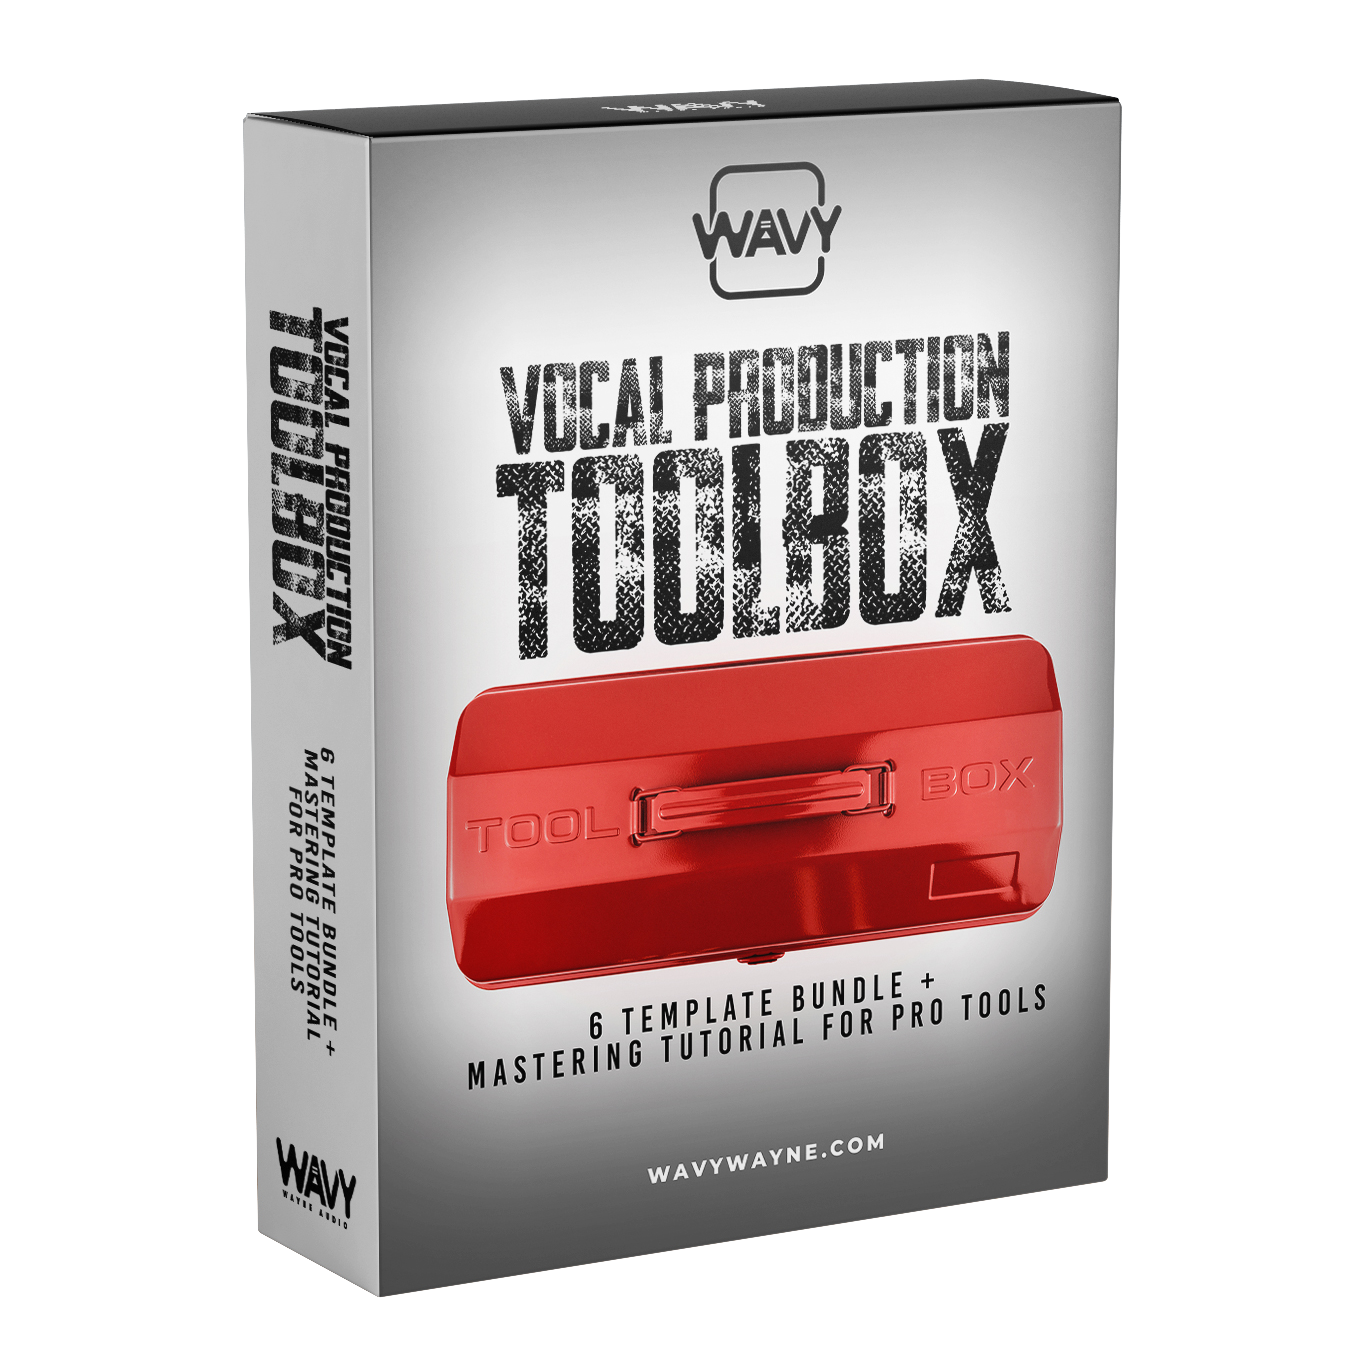 Vocal Production Toolbox - 6 Template Bundle + Mastering Tutorial for Pro Tools